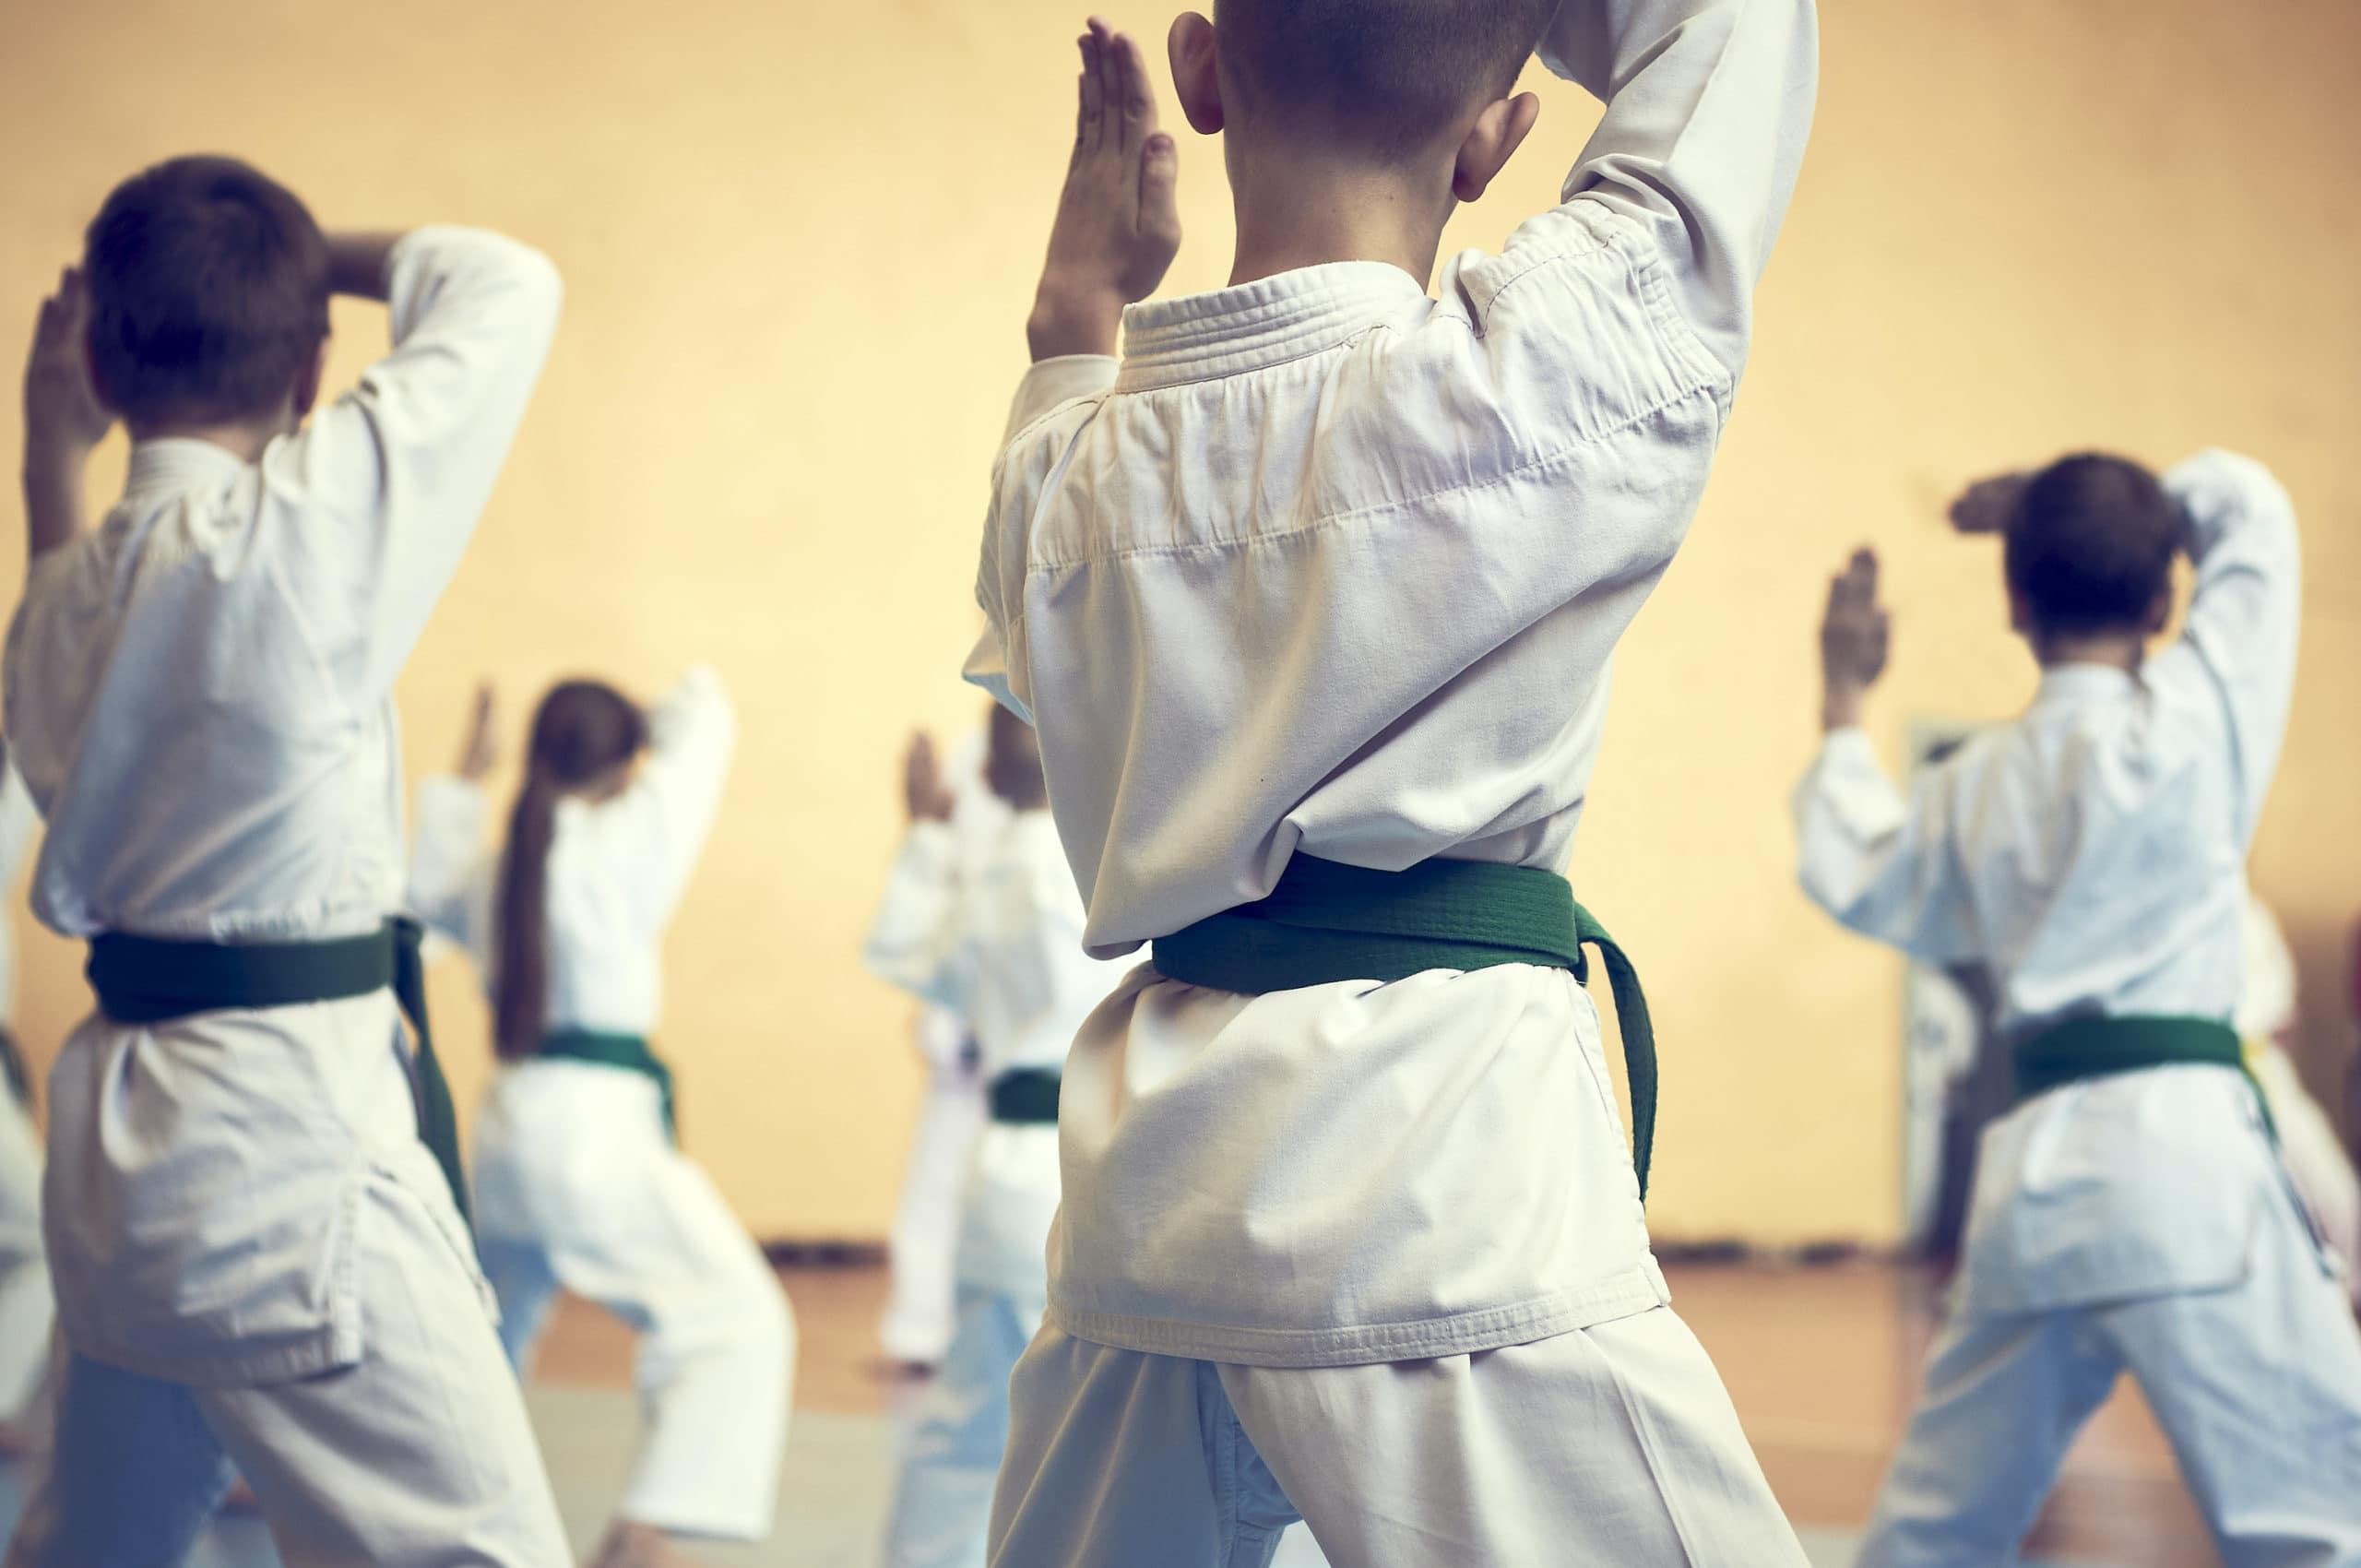 Self-defense and martial arts training in Israel